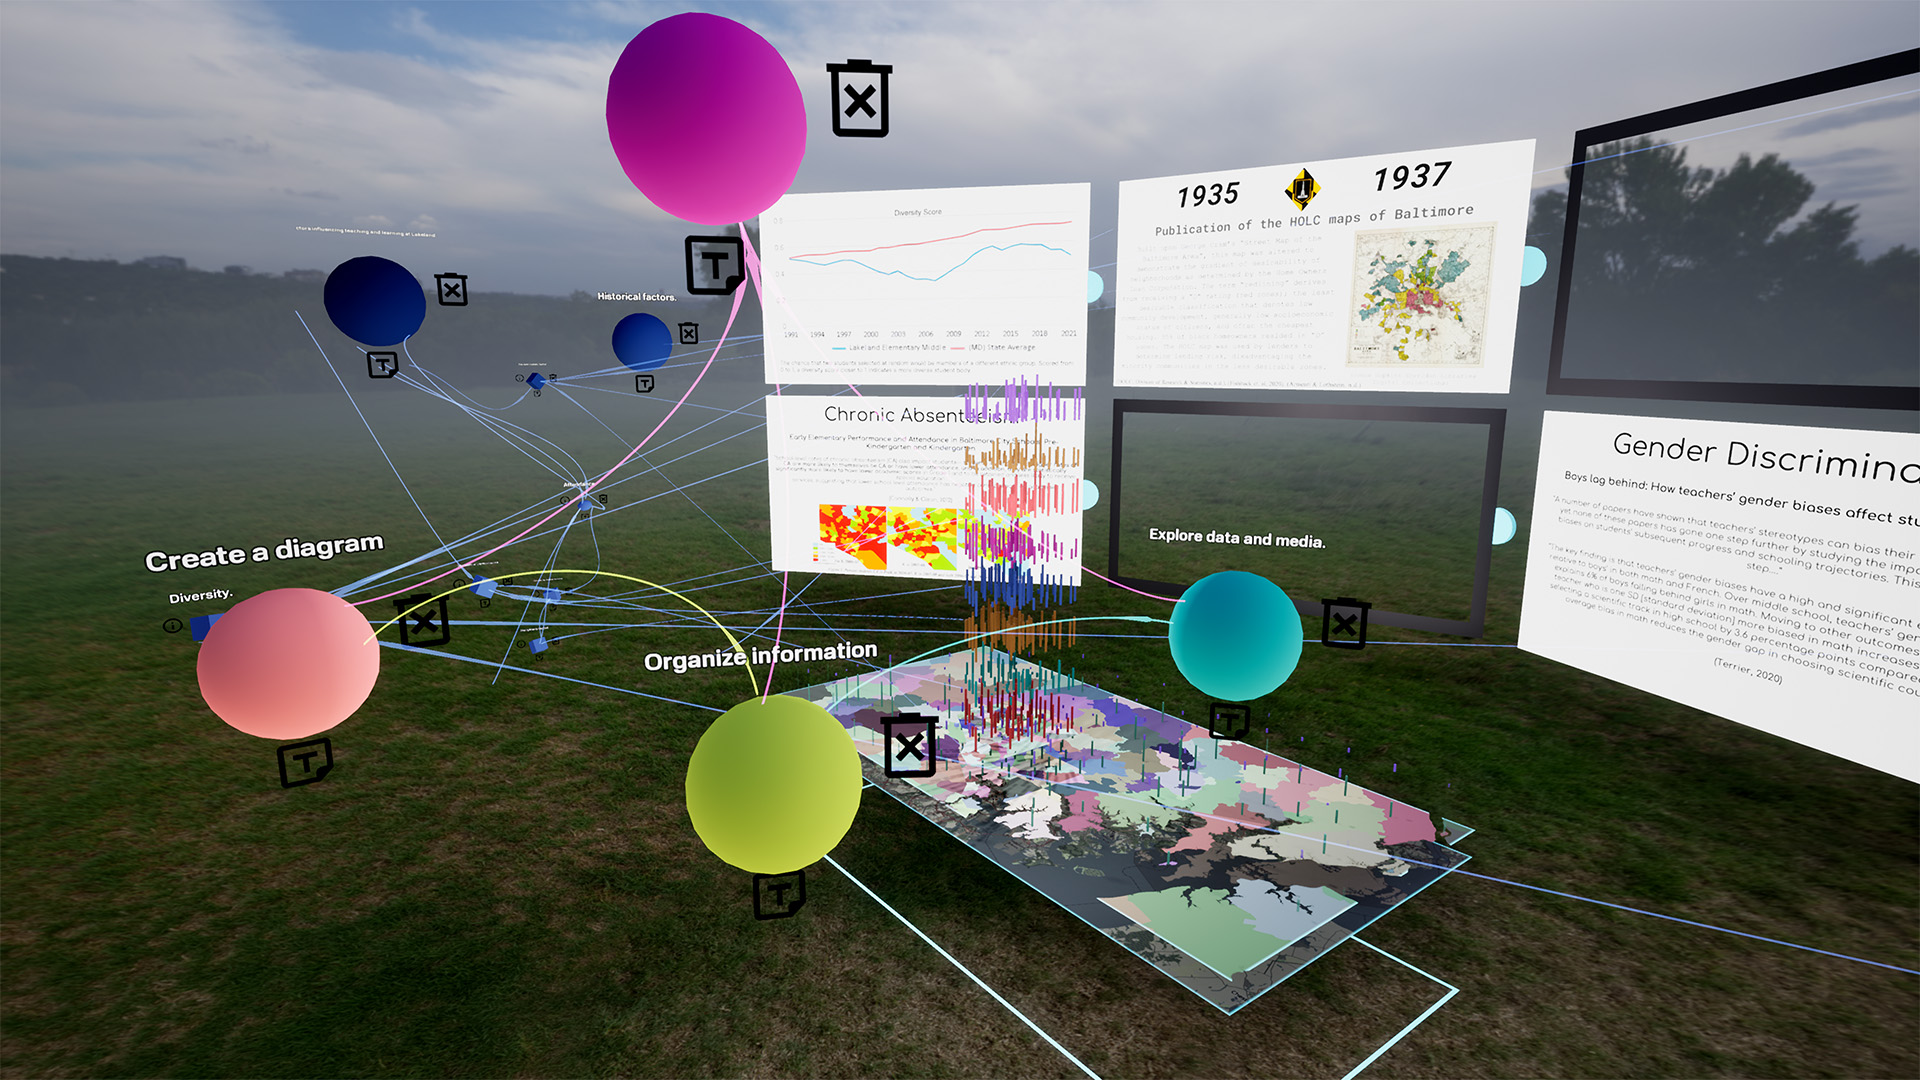 A field, outdoors. In the foreground are multiple images, set in space, that look like billboards with words and graphs on them. There is a 3D map with bar graphs on it, and floating spheres of different colors, labeled , and with lines connect them to one another and to the bar graphs over the map.